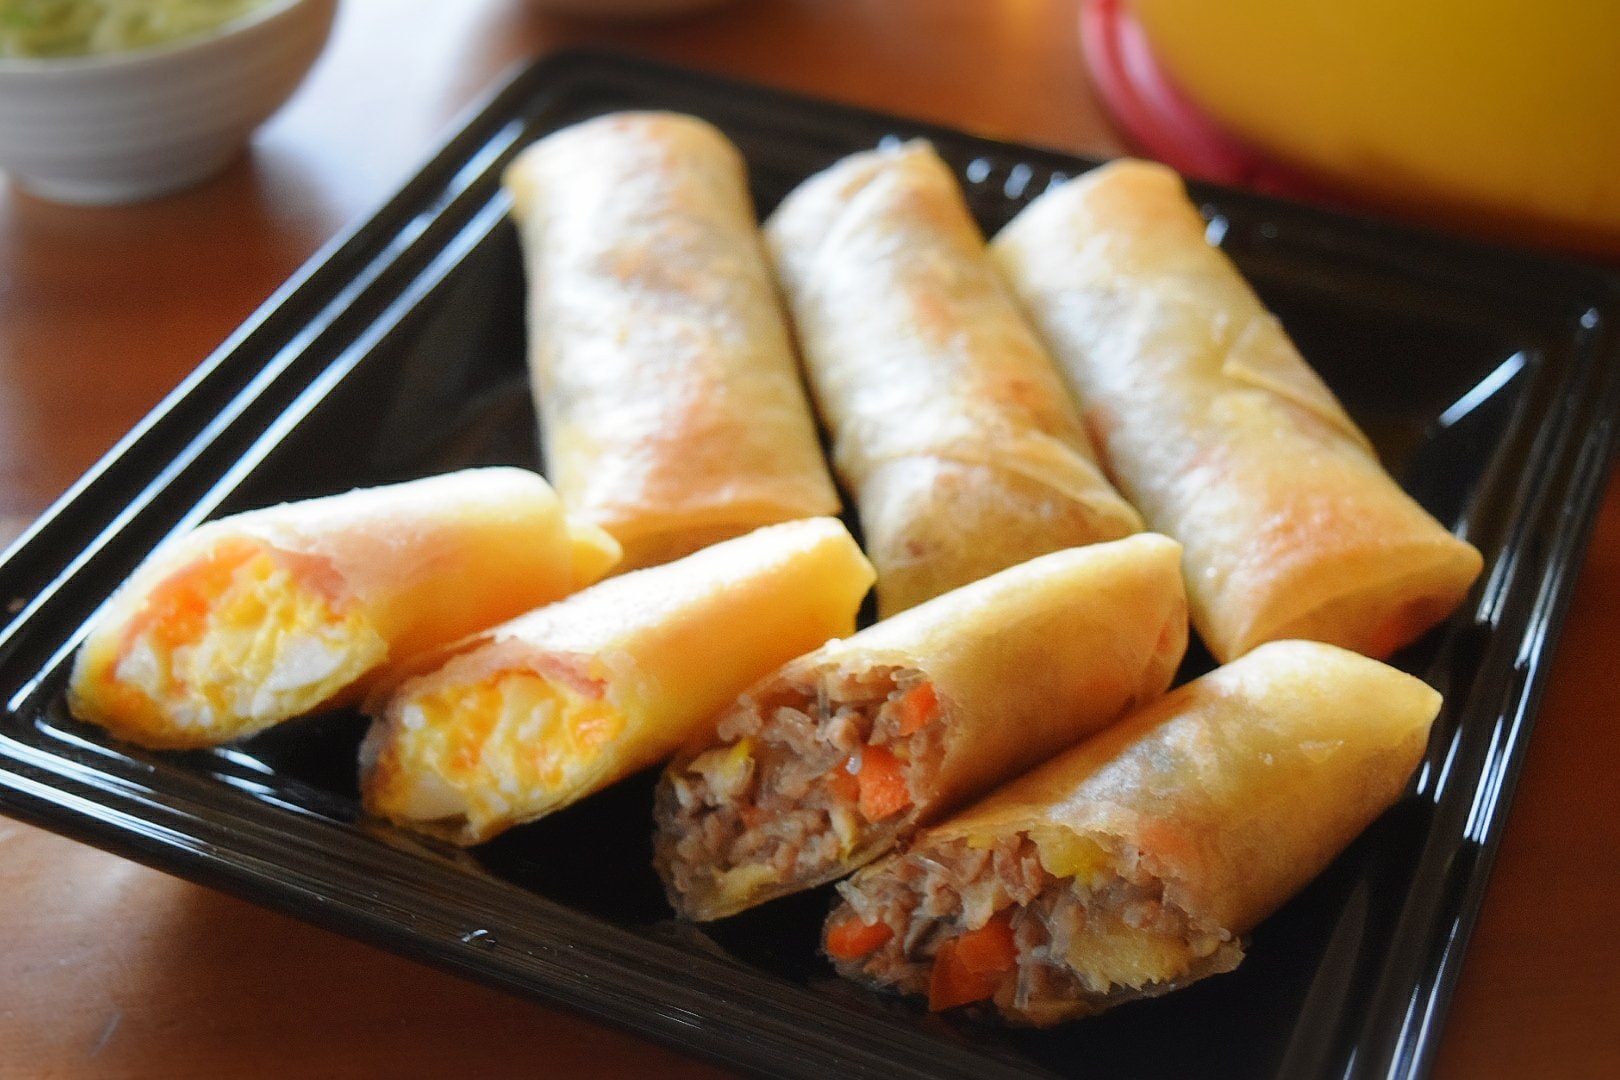 Plate of bamboo shoot spring rolls